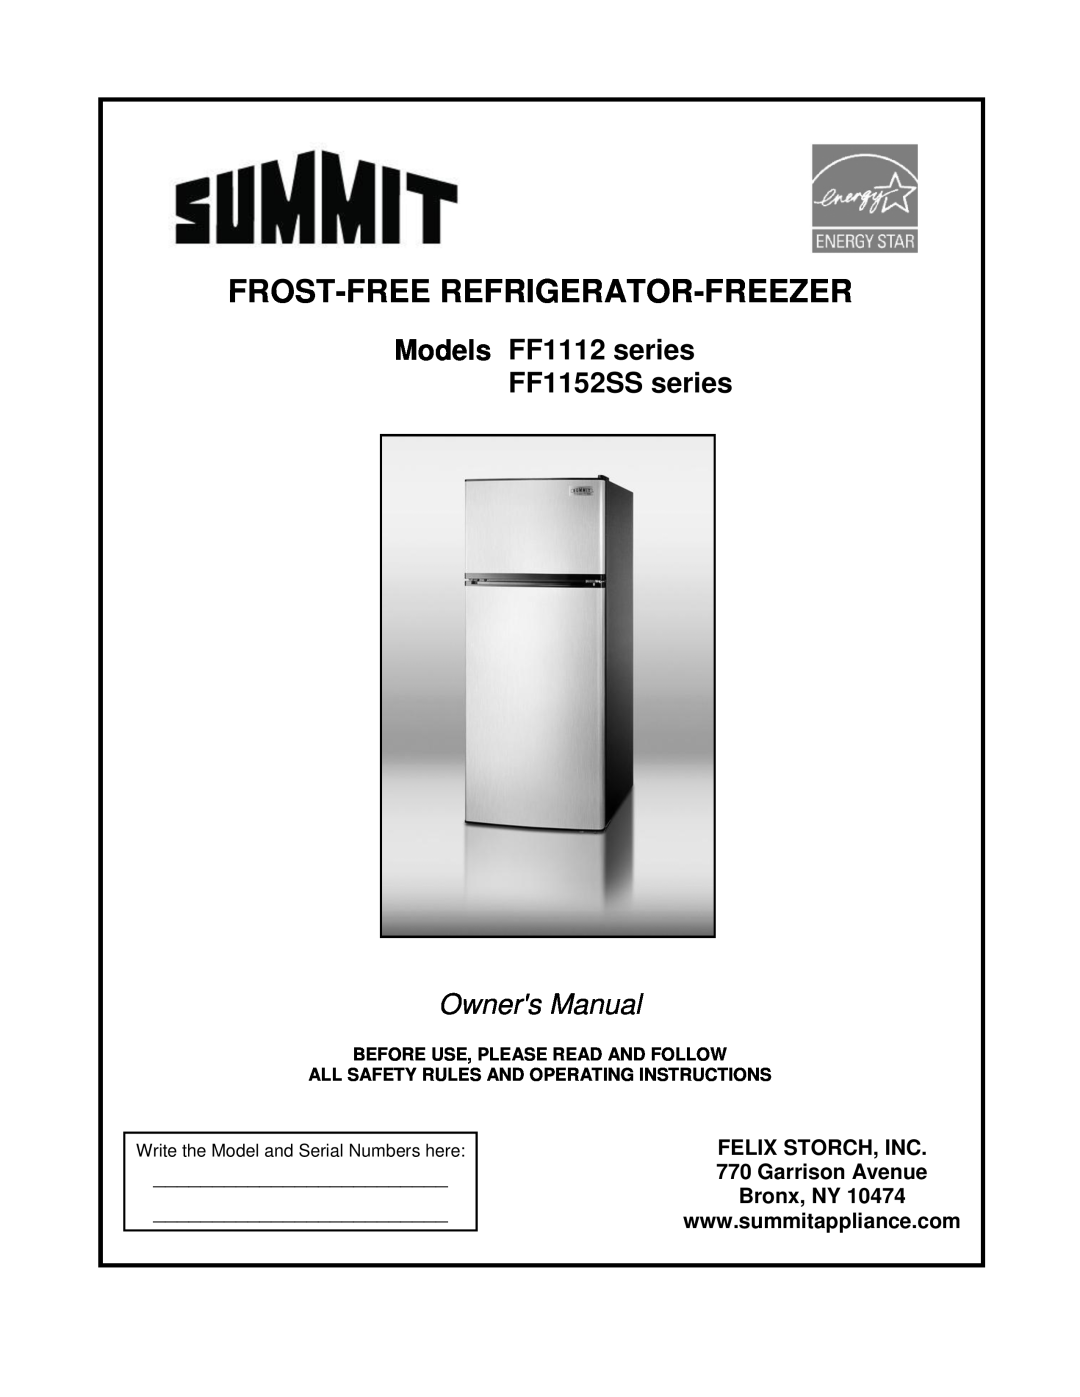 Summit owner manual Frost-Free Refrigerator-Freezer, Models FF1112 series FF1152SS series, Owners Manual 